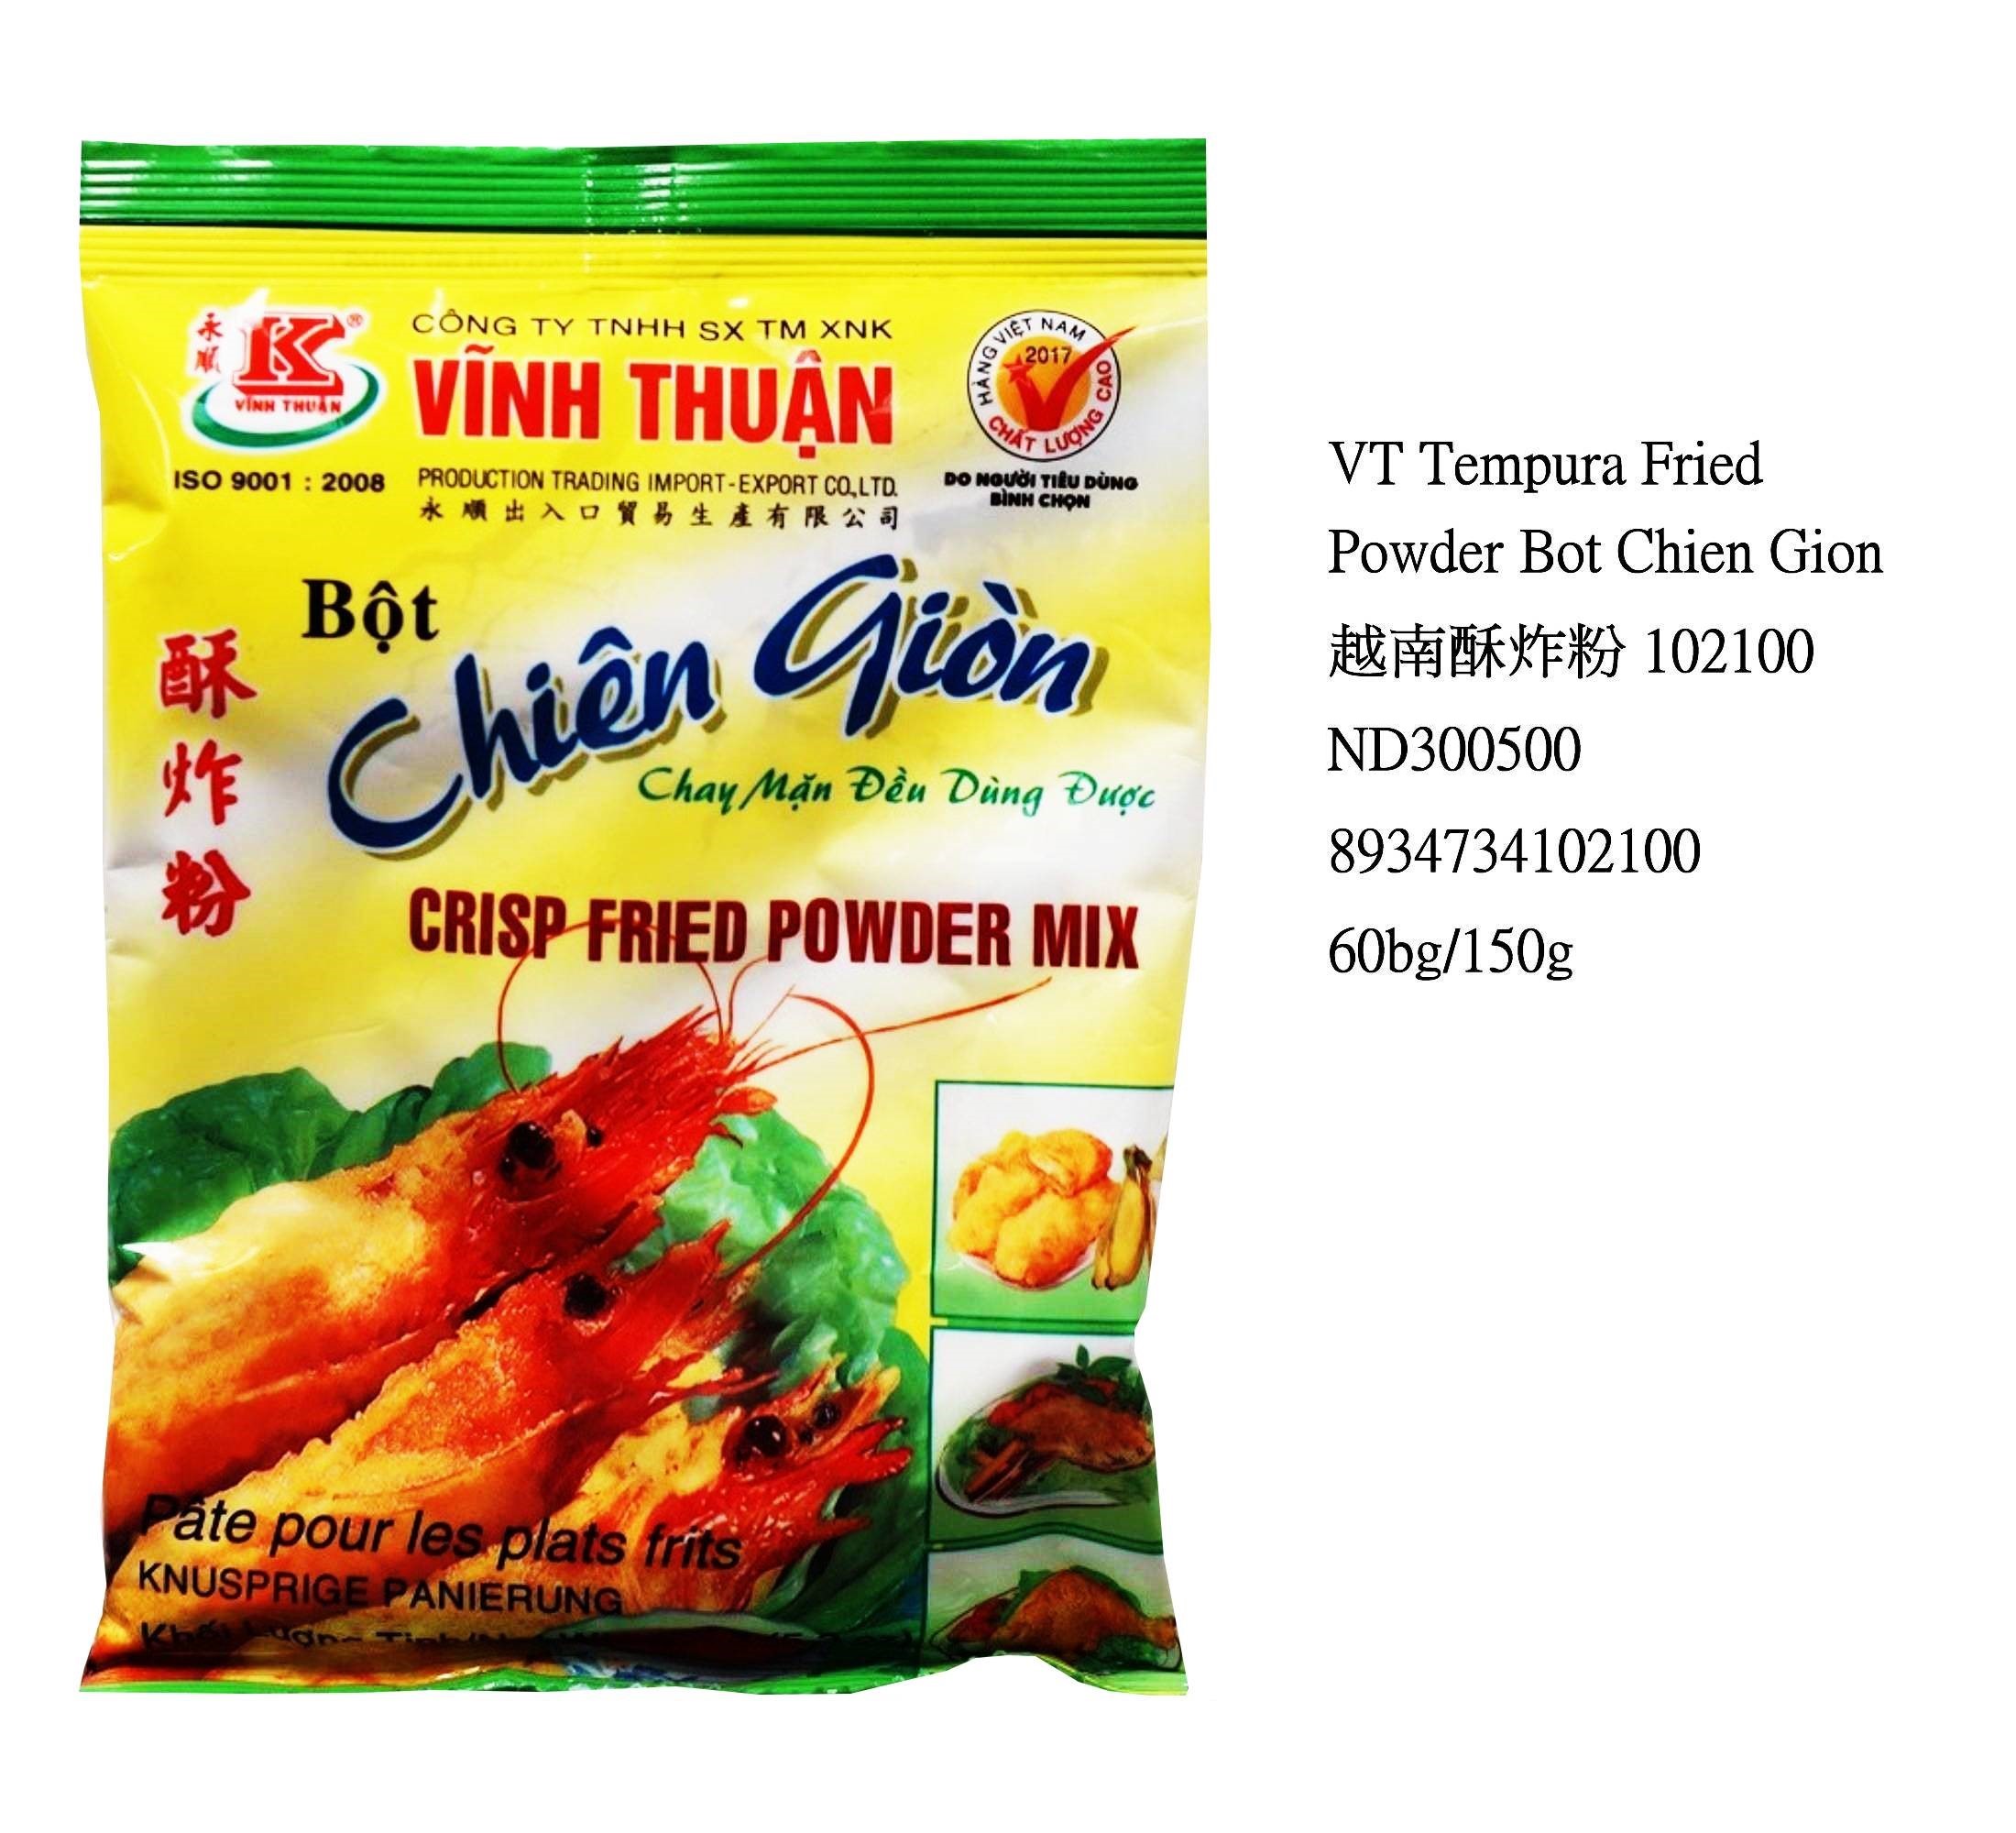 VINH THUAN FLOUR FOR WET RICE PAPER BANH CUON ND300530